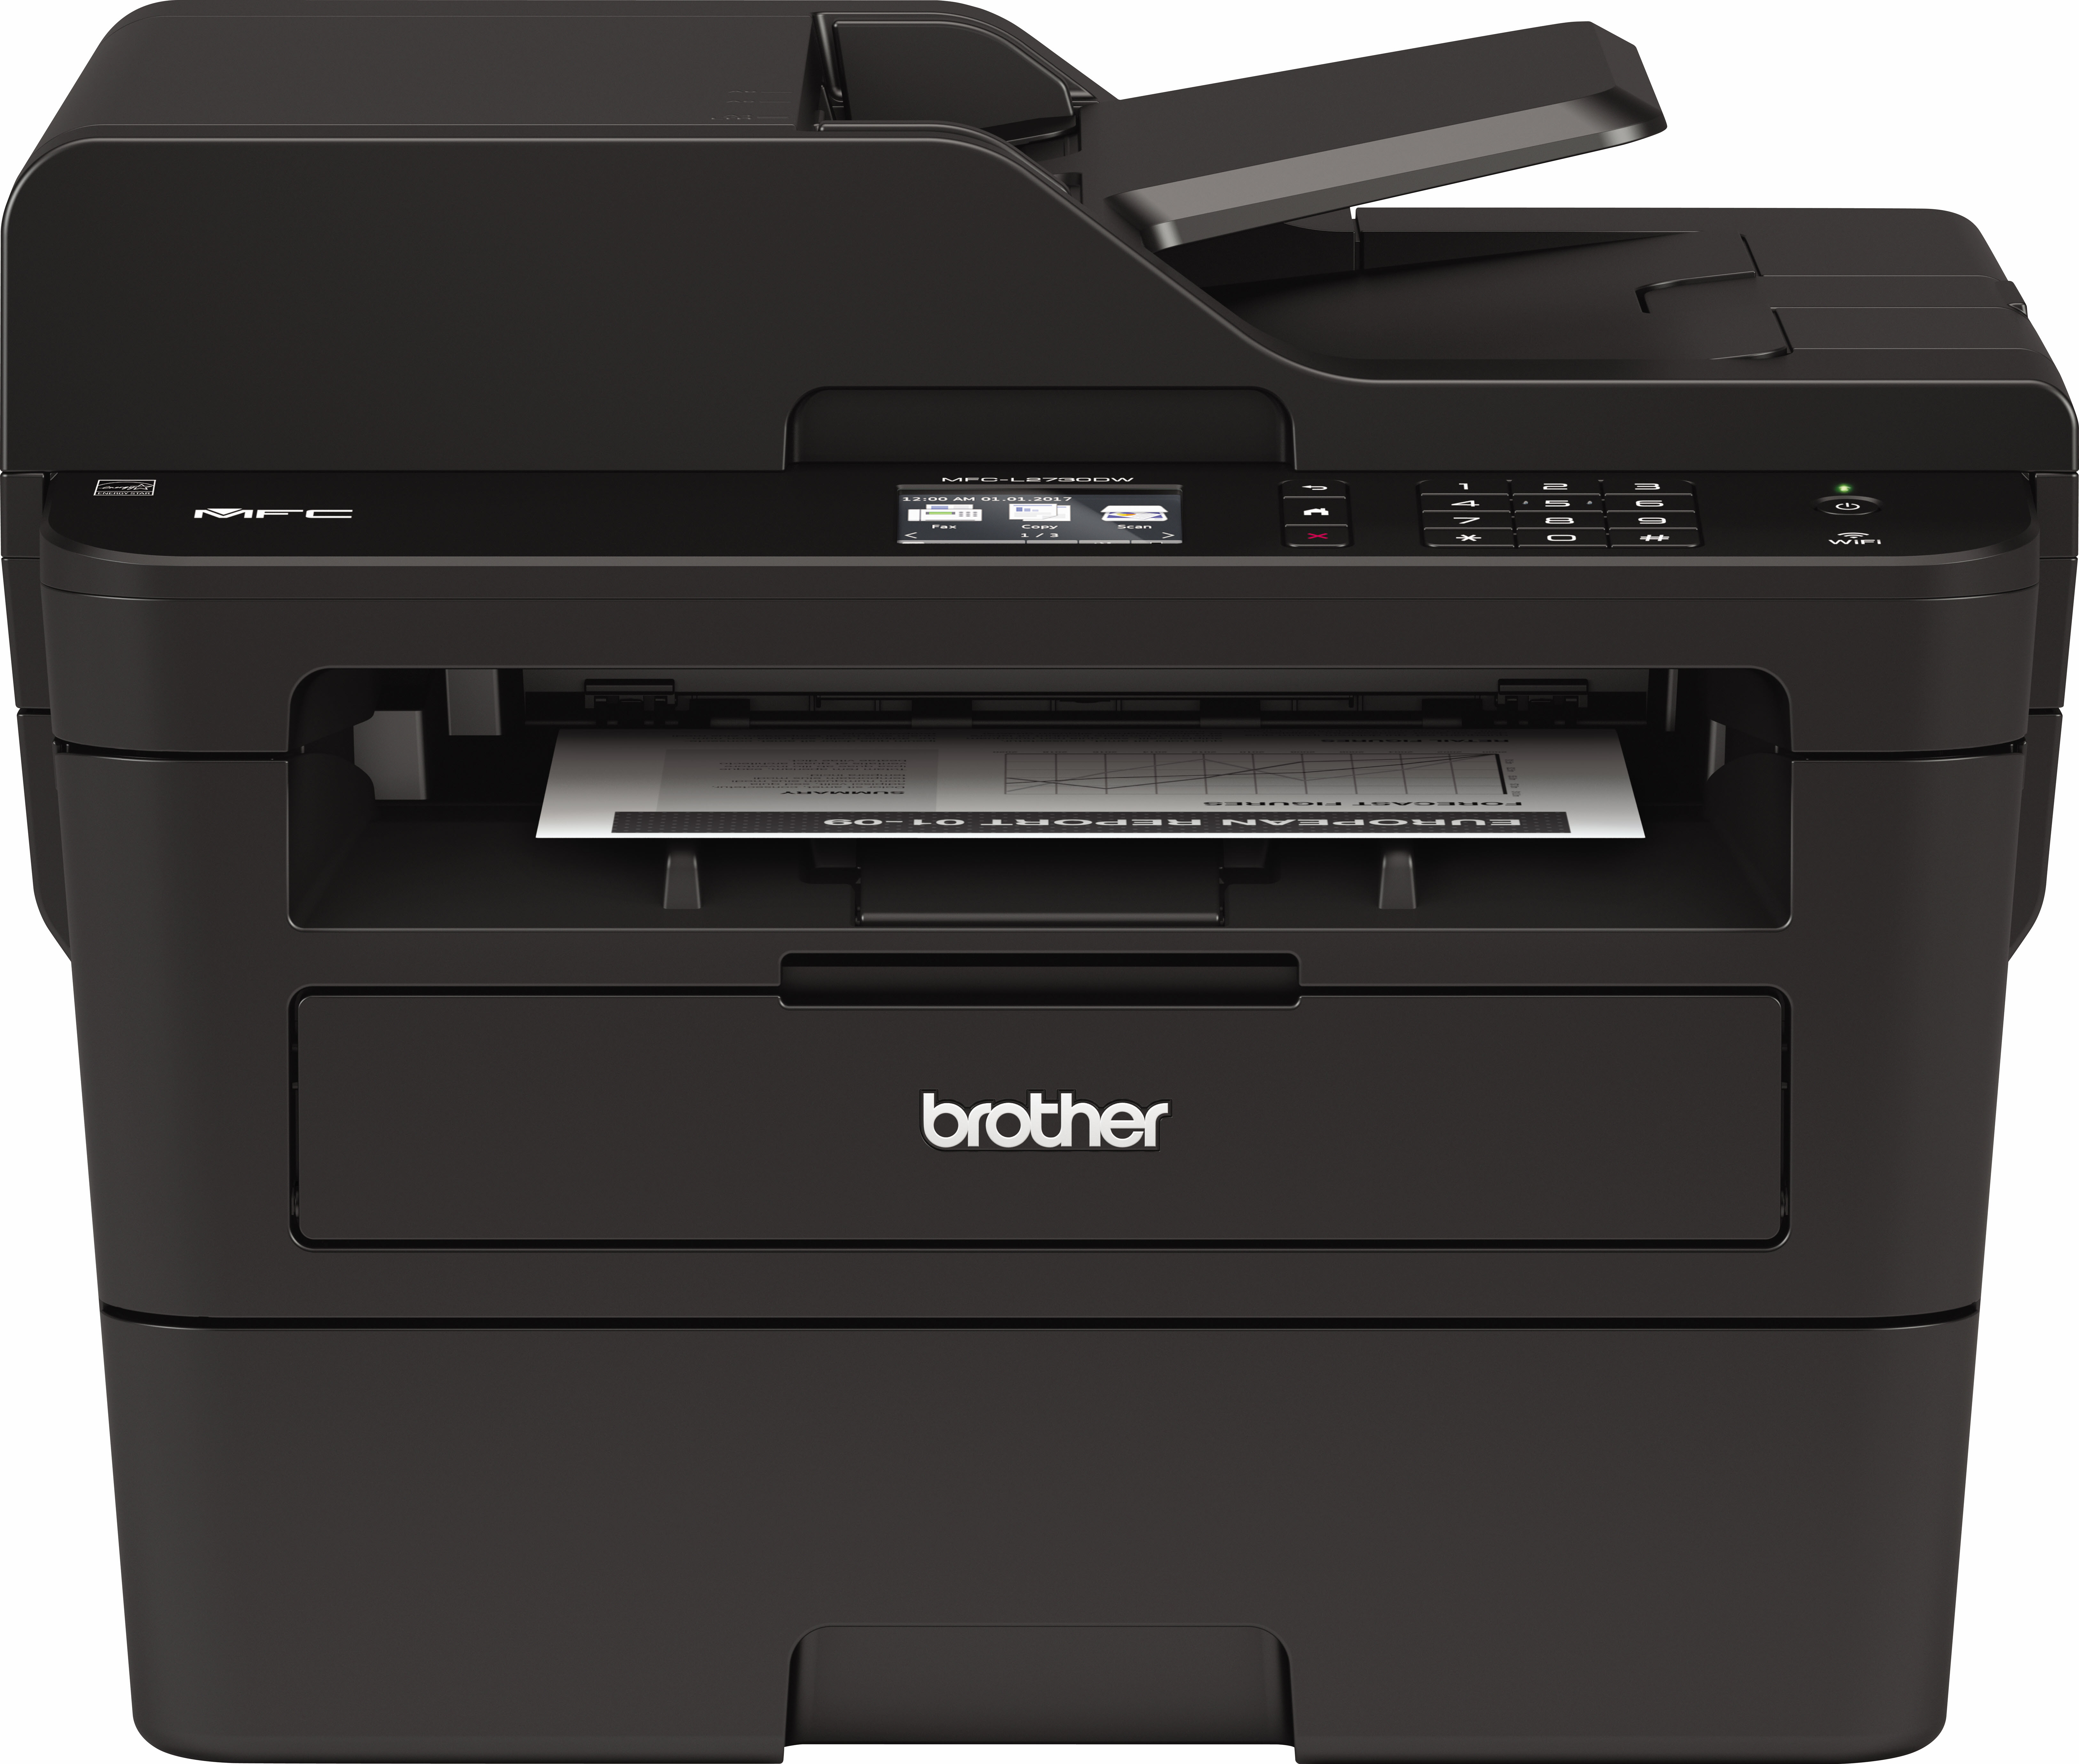 Brother MFC-L2730DW Monochrome Laser All-in-One Wireless Printer with 2.7” Color Touchscreen - image 1 of 11